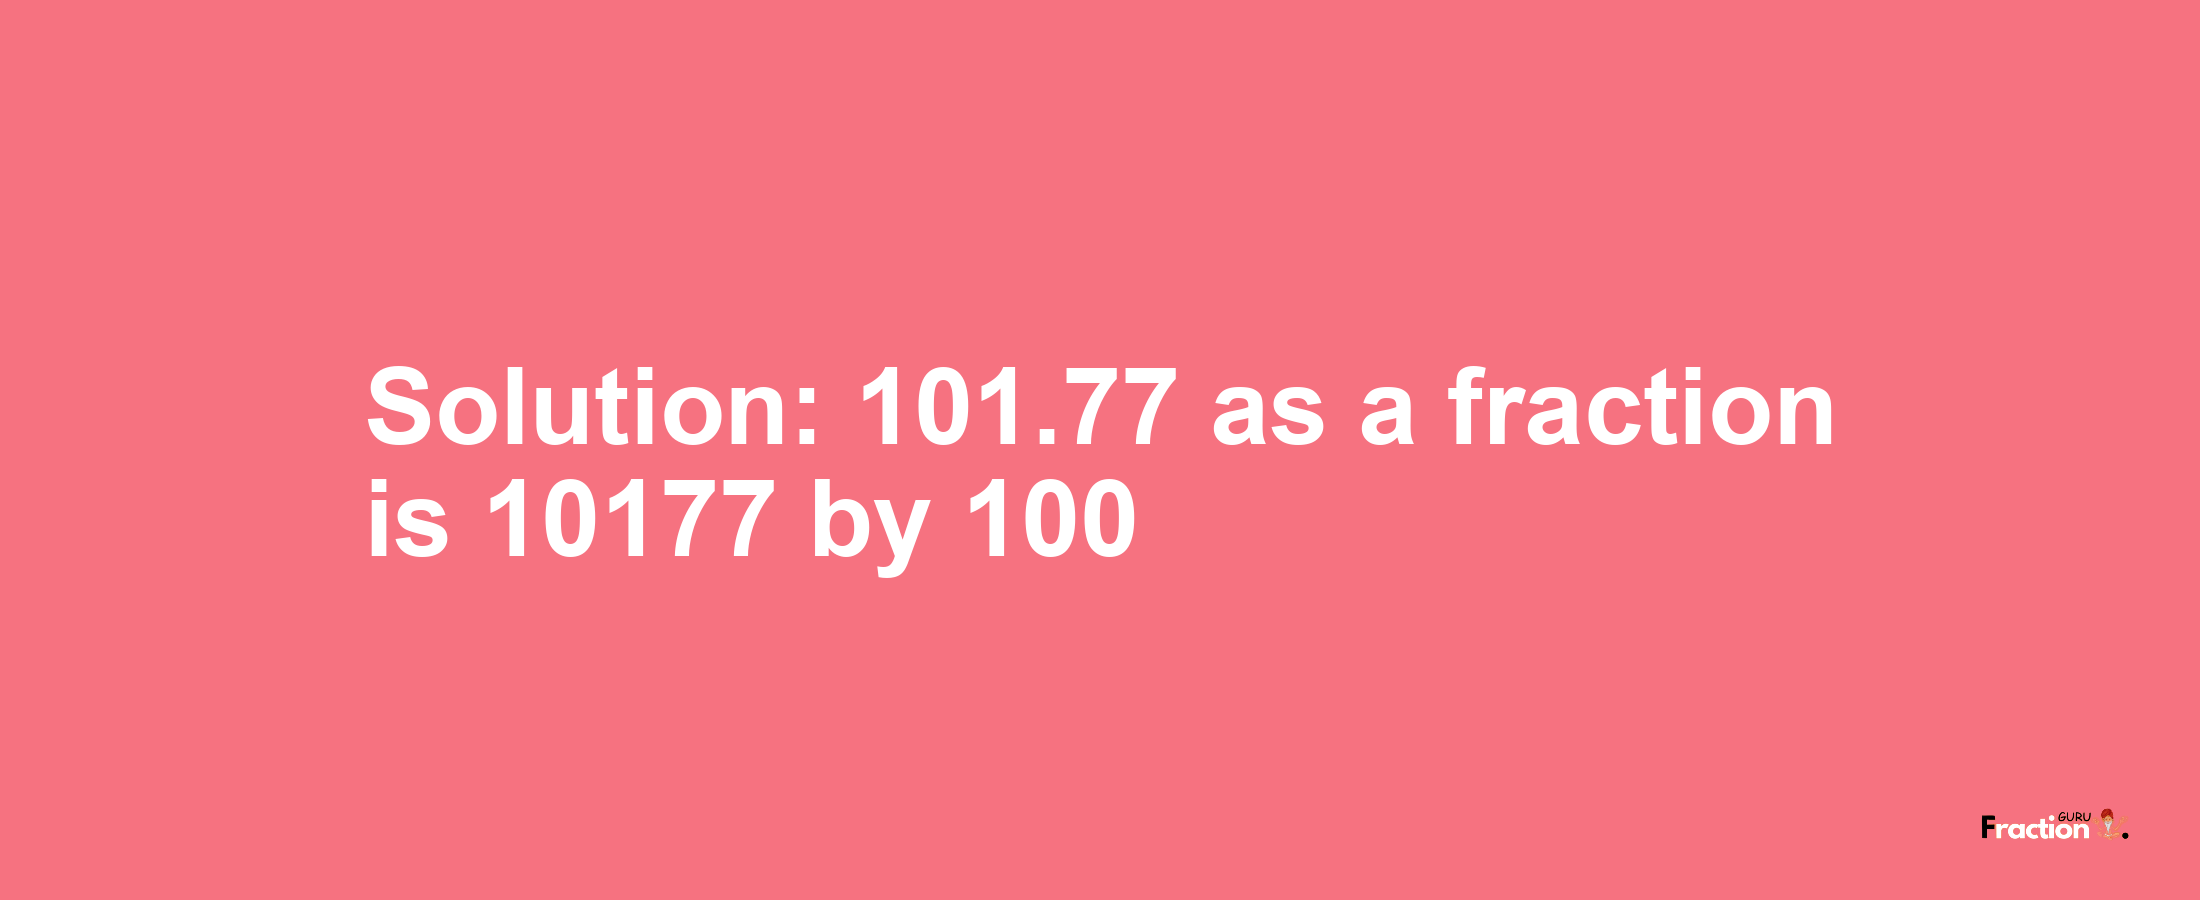 Solution:101.77 as a fraction is 10177/100